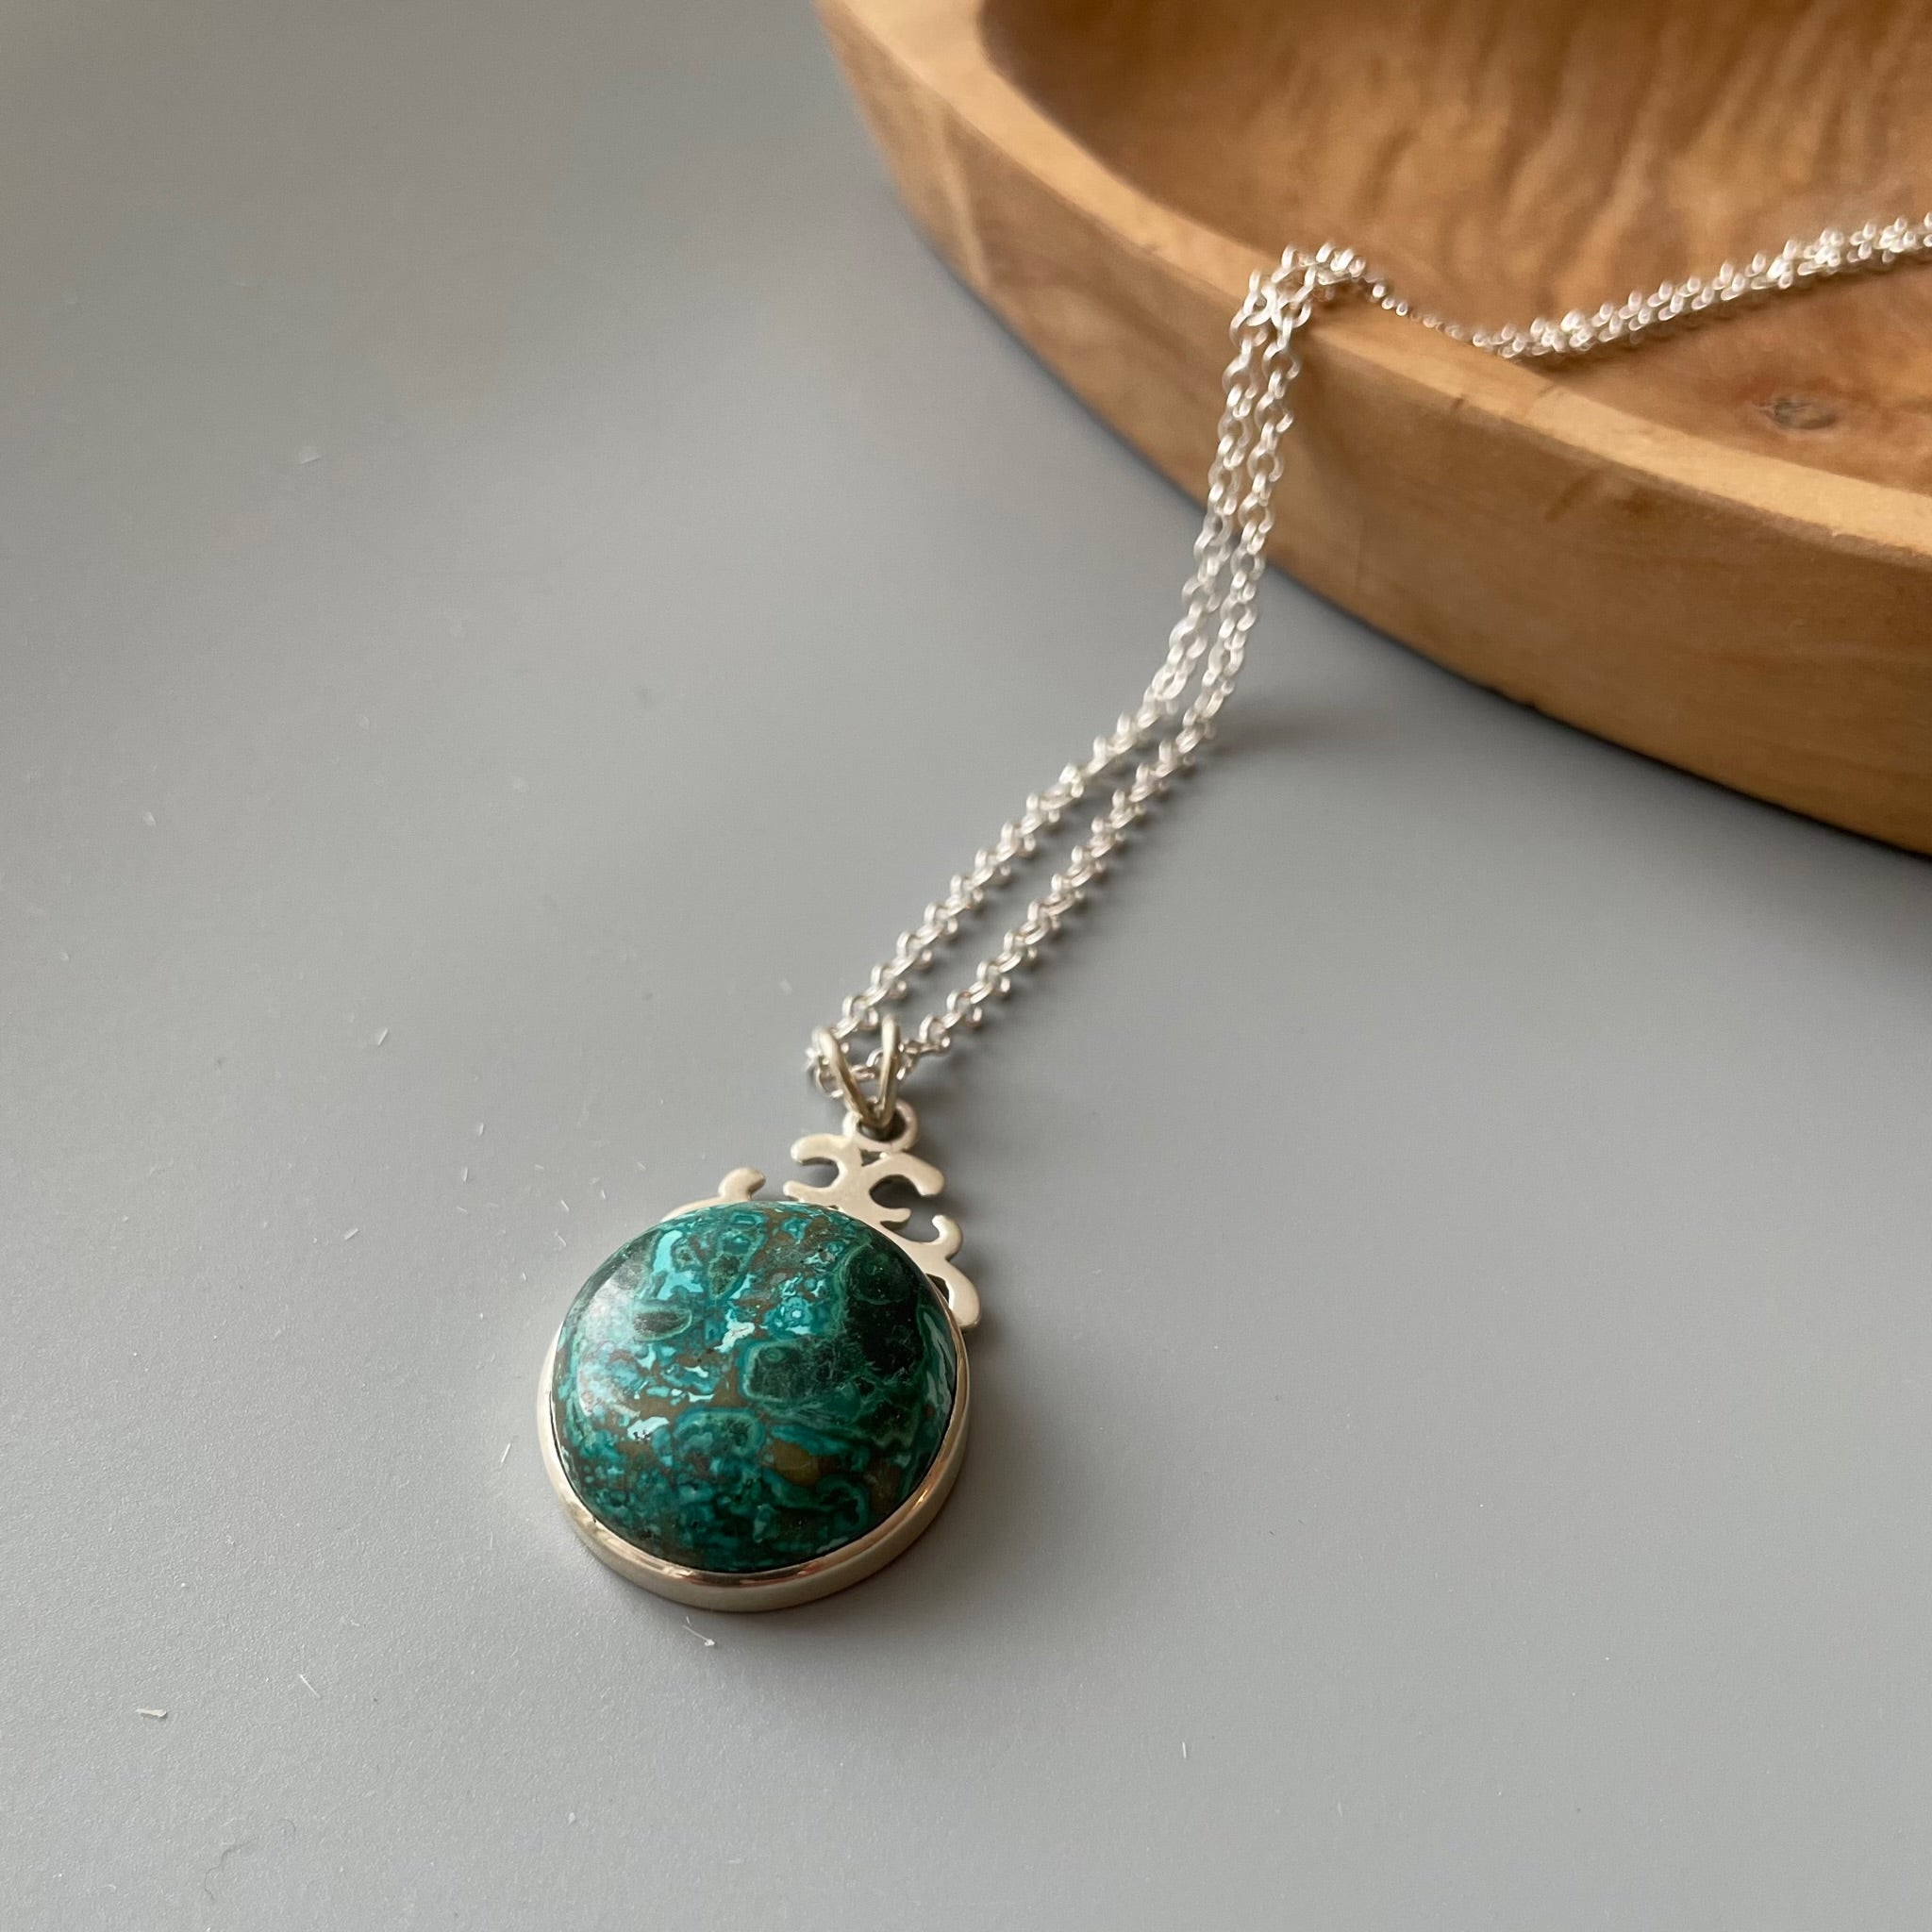 Handmade Silver Necklace with Natural Gemstone